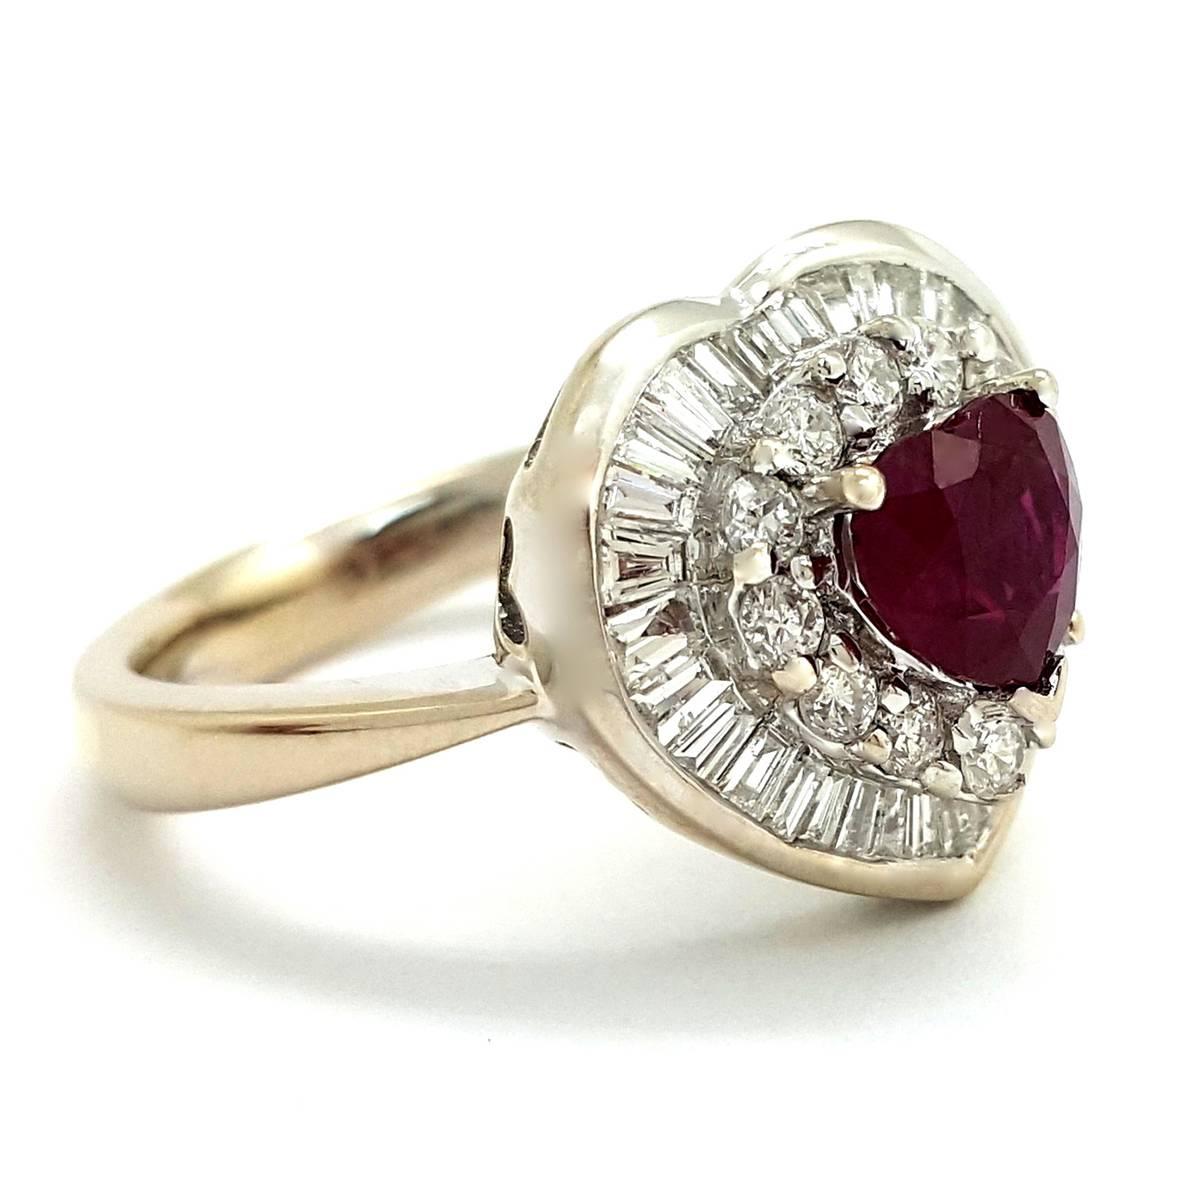 A Beautiful Heart Cut Ruby and Diamond Ring in 18k White Gold In Excellent Condition For Sale In Scottsdale, AZ